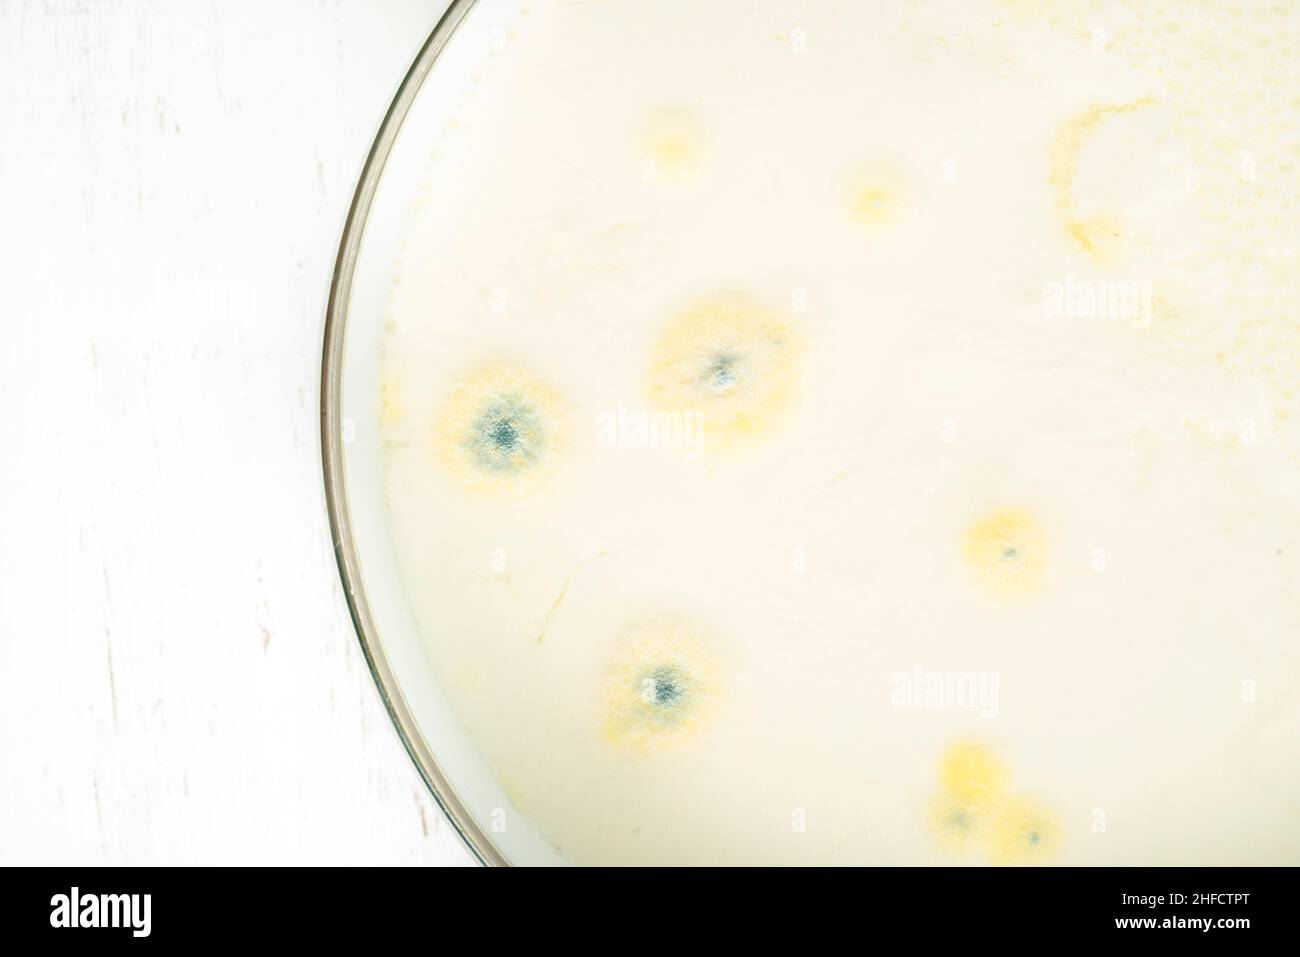 moldy yogurt, growth of mold on yogurt or dairy product food surface exceeded expiry date. rotten yoghurt or milk background Stock Photo